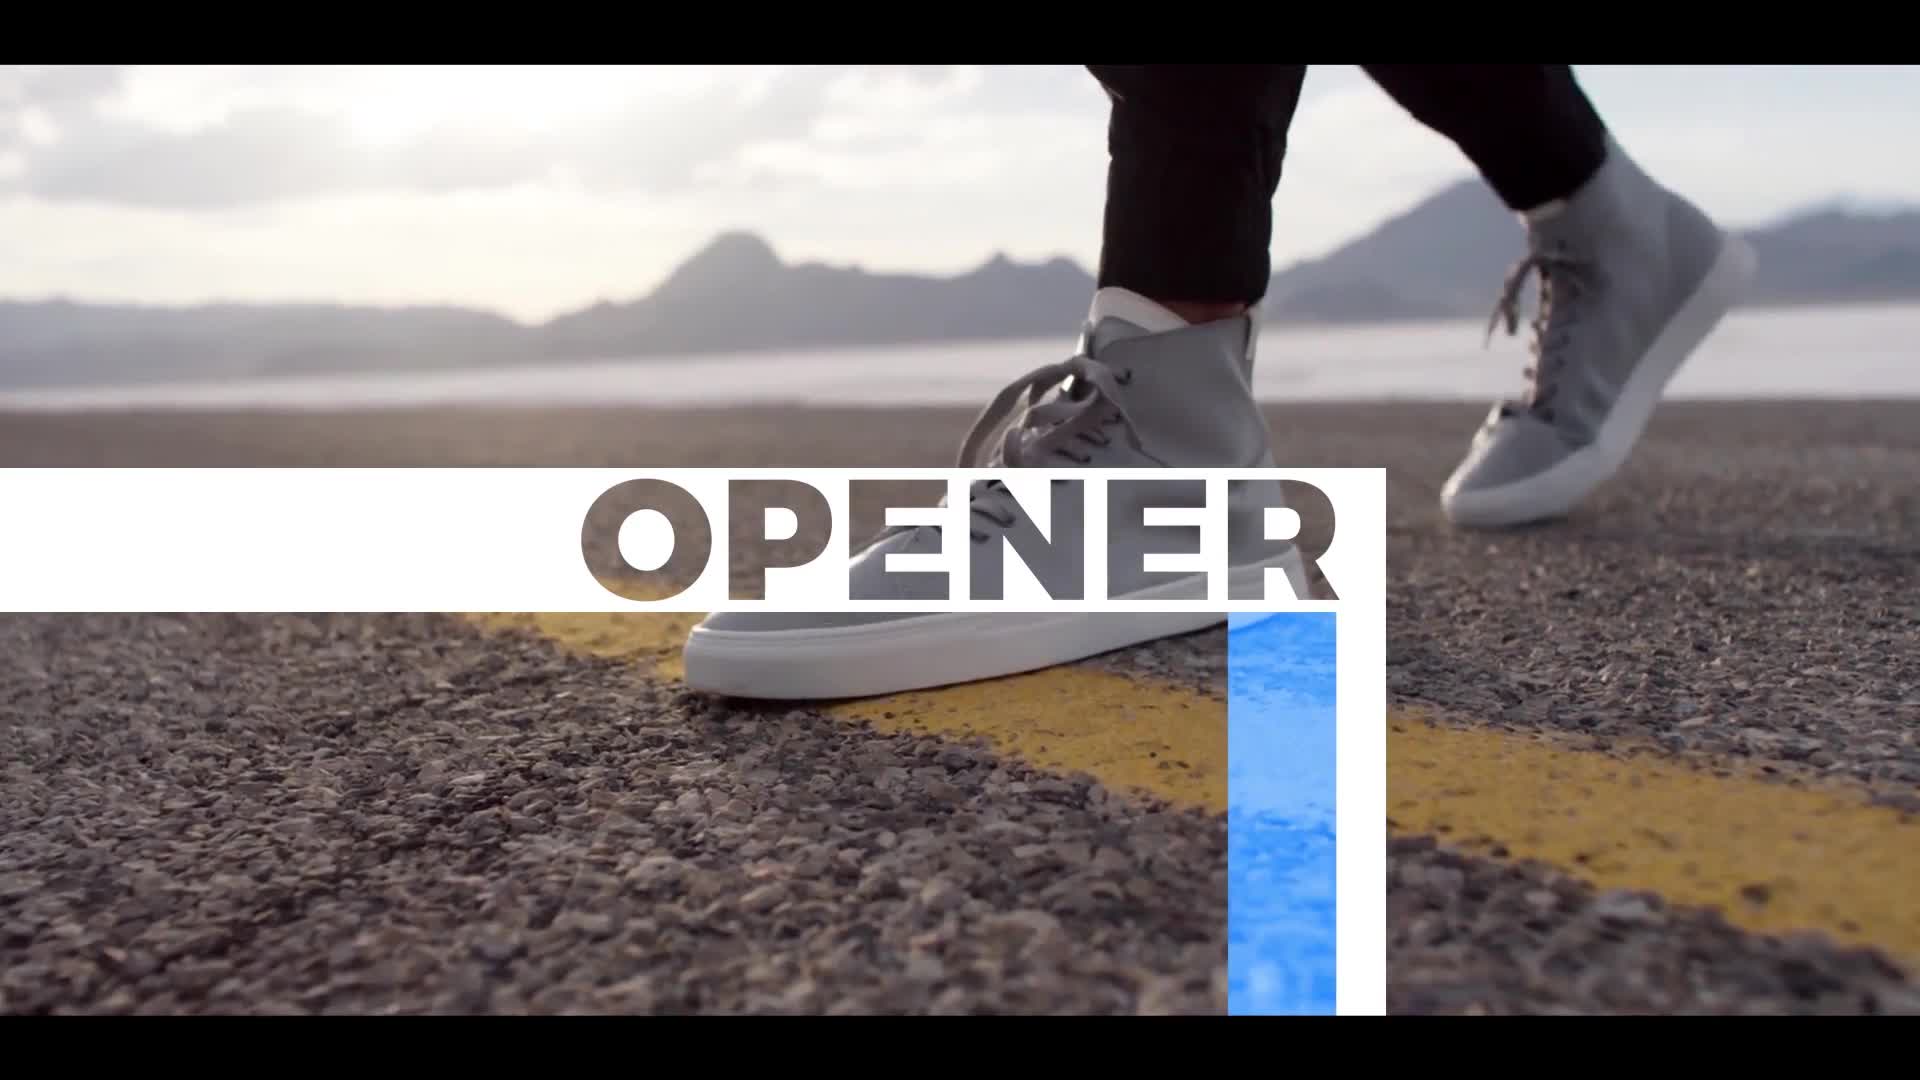 Promo Opener 2 in 1 - Download Videohive 21868083